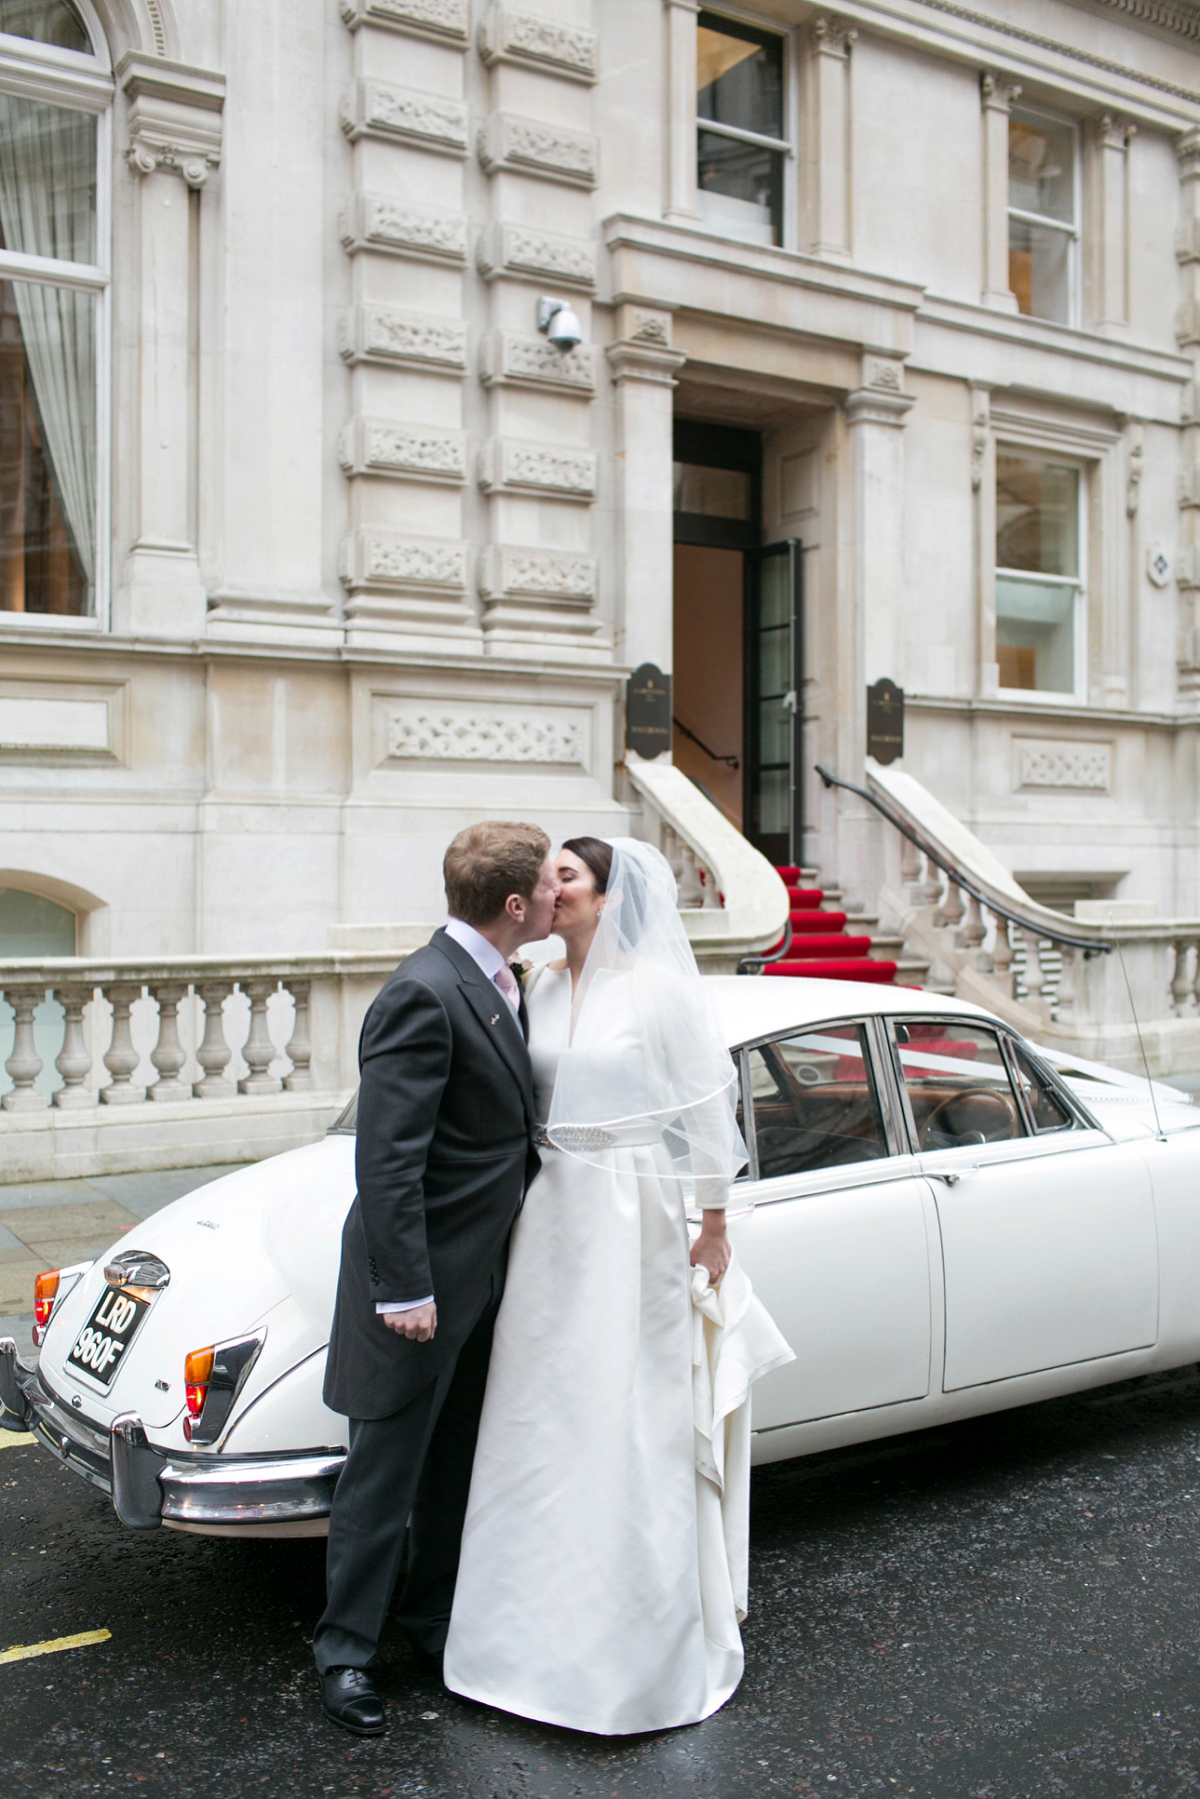 Jane wore a gown by Jesús Peiró for her chic and elegant winter wedding at the Corinthia Hotel in London. Photography by Anneli Marinovich.